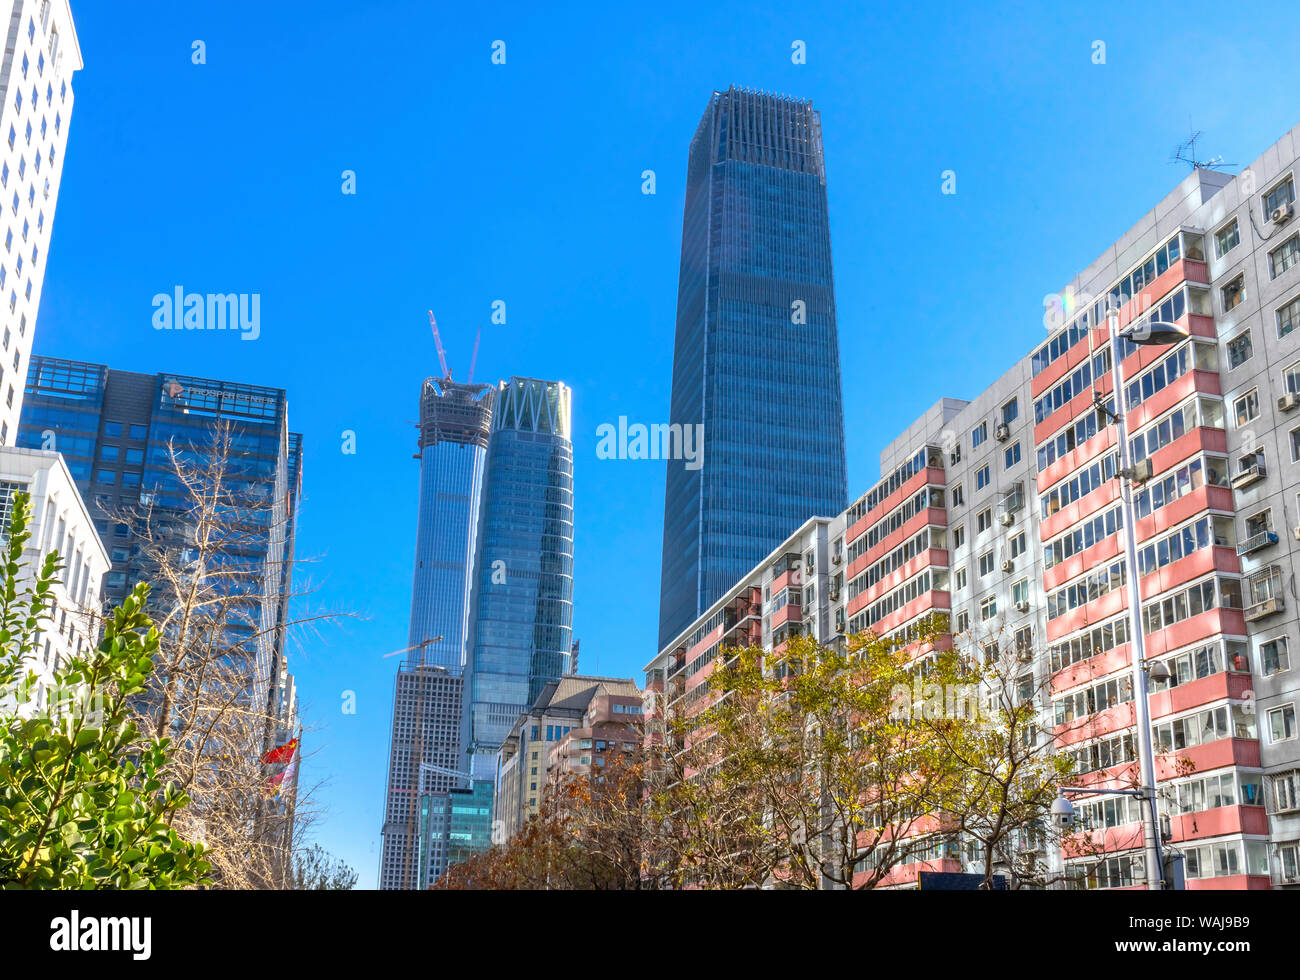 China World Trade Center, Z15 Towers, Apartment Buildings old and new, Guamao Central Business District, Beijing, China Stock Photo